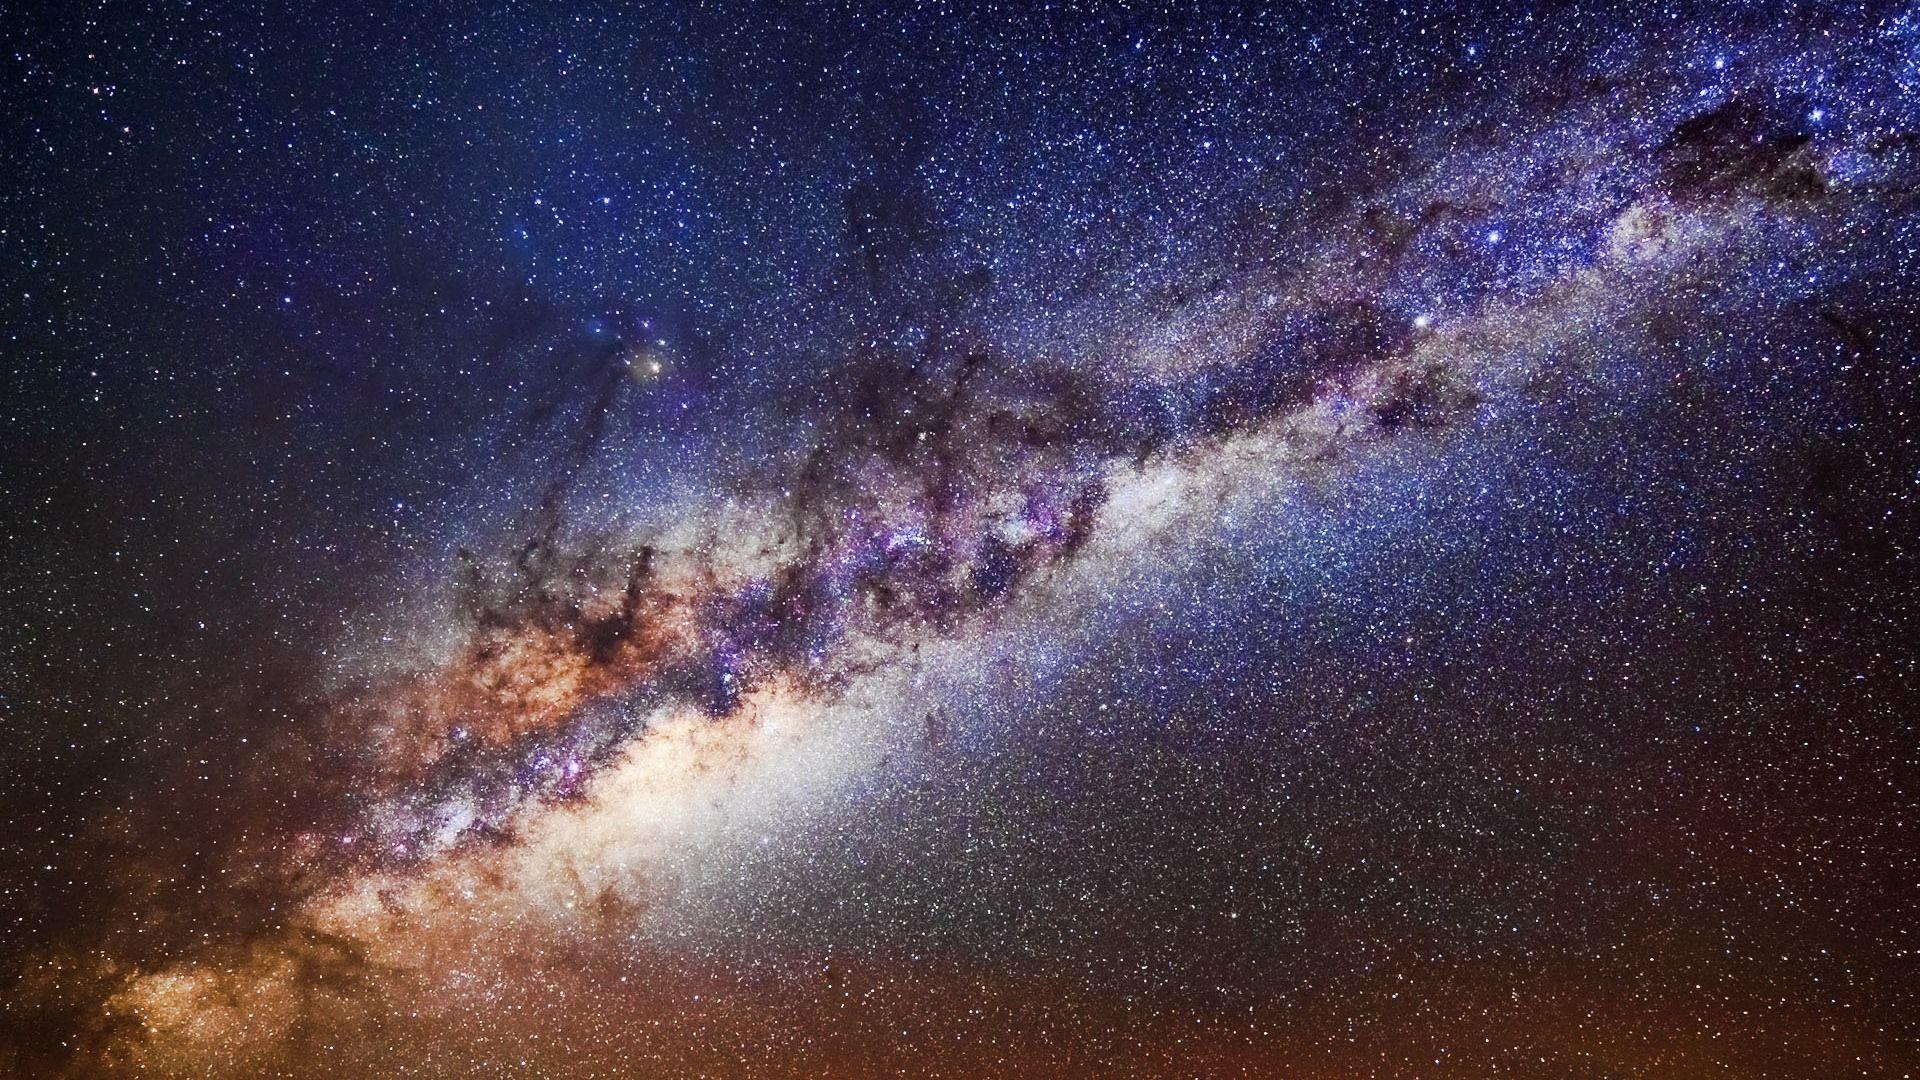 Milky Way Hubble Wallpapers - Top Free Milky Way Hubble Backgrounds